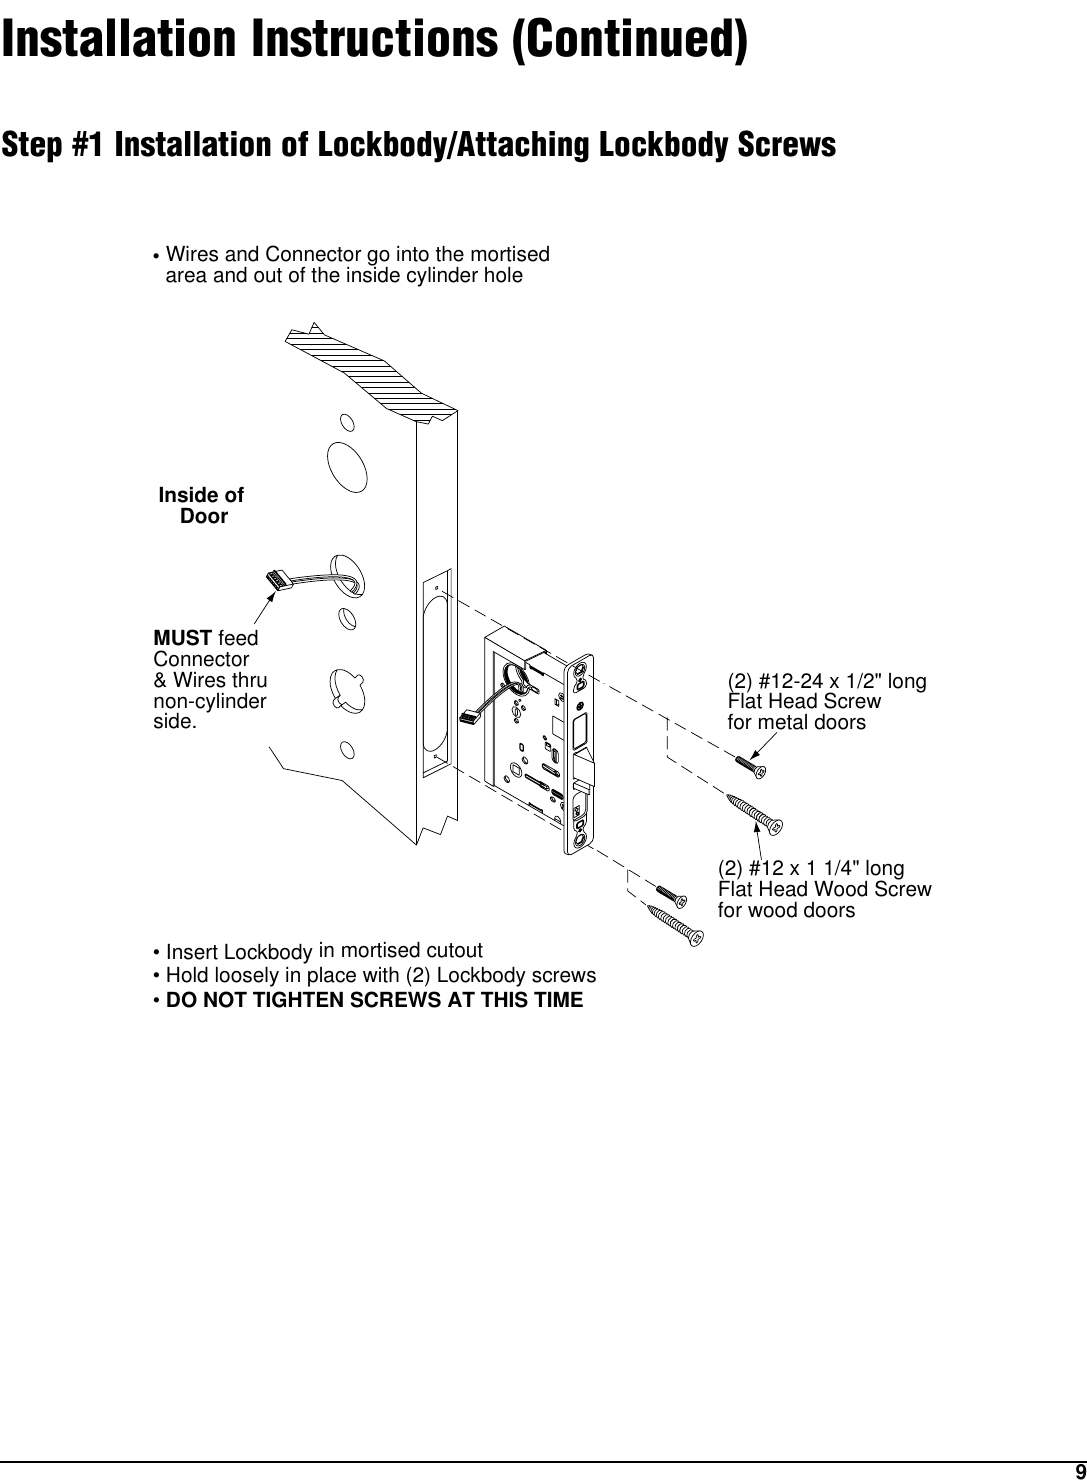 9Installation Instructions (Continued)Step #1 Installation of Lockbody/Attaching Lockbody ScrewsInside of Door(2) #12-24 x 1/2&quot; longFlat Head Screwfor metal doors(2) #12 x 1 1/4&quot; longFlat Head Wood Screwfor wood doors• Wires and Connector go into the mortised   area and out of the inside cylinder hole• Insert Lockbody in mortised cutout• Hold loosely in place with (2) Lockbody screws• DO NOT TIGHTEN SCREWS AT THIS TIMEMUST feed Connector &amp; Wires thrunon-cylinderside.